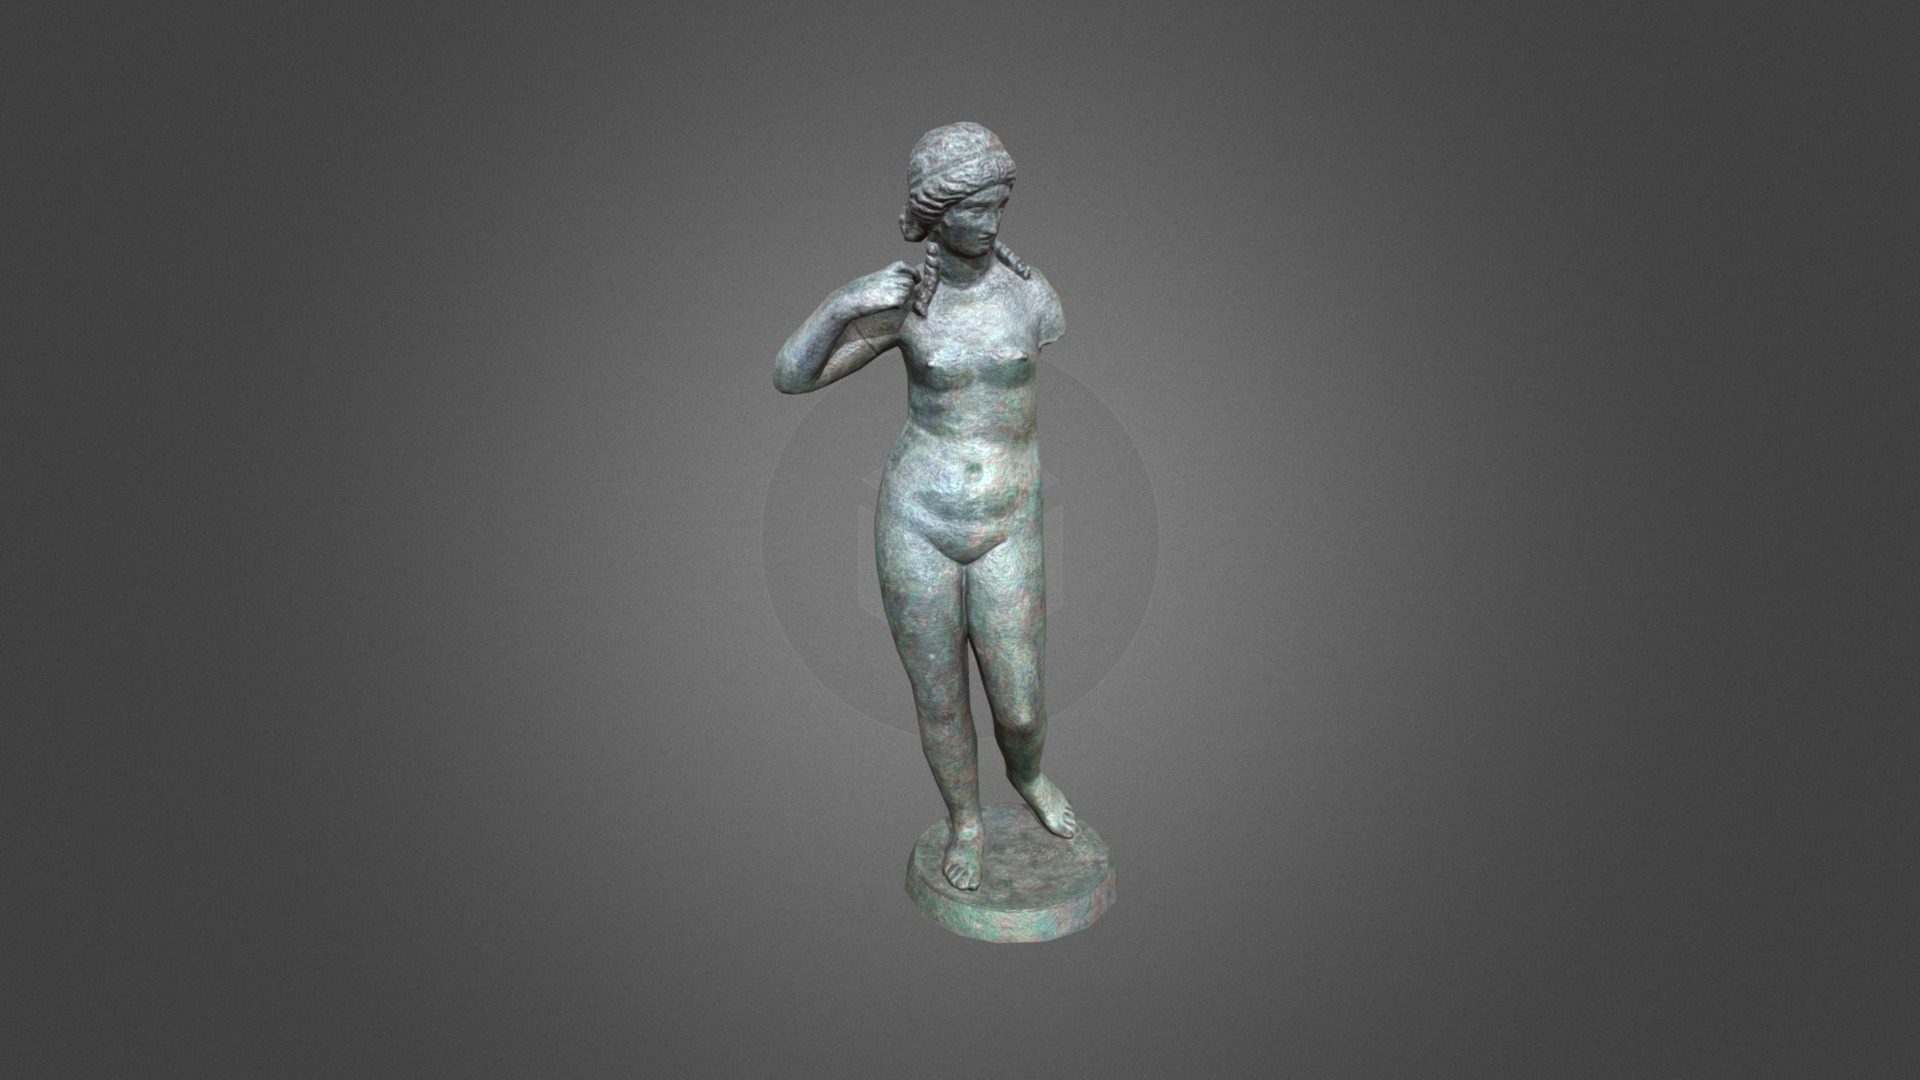 3D model Venera statuette - This is a 3D model of the Venera statuette. The 3D model is about a statue of a person.